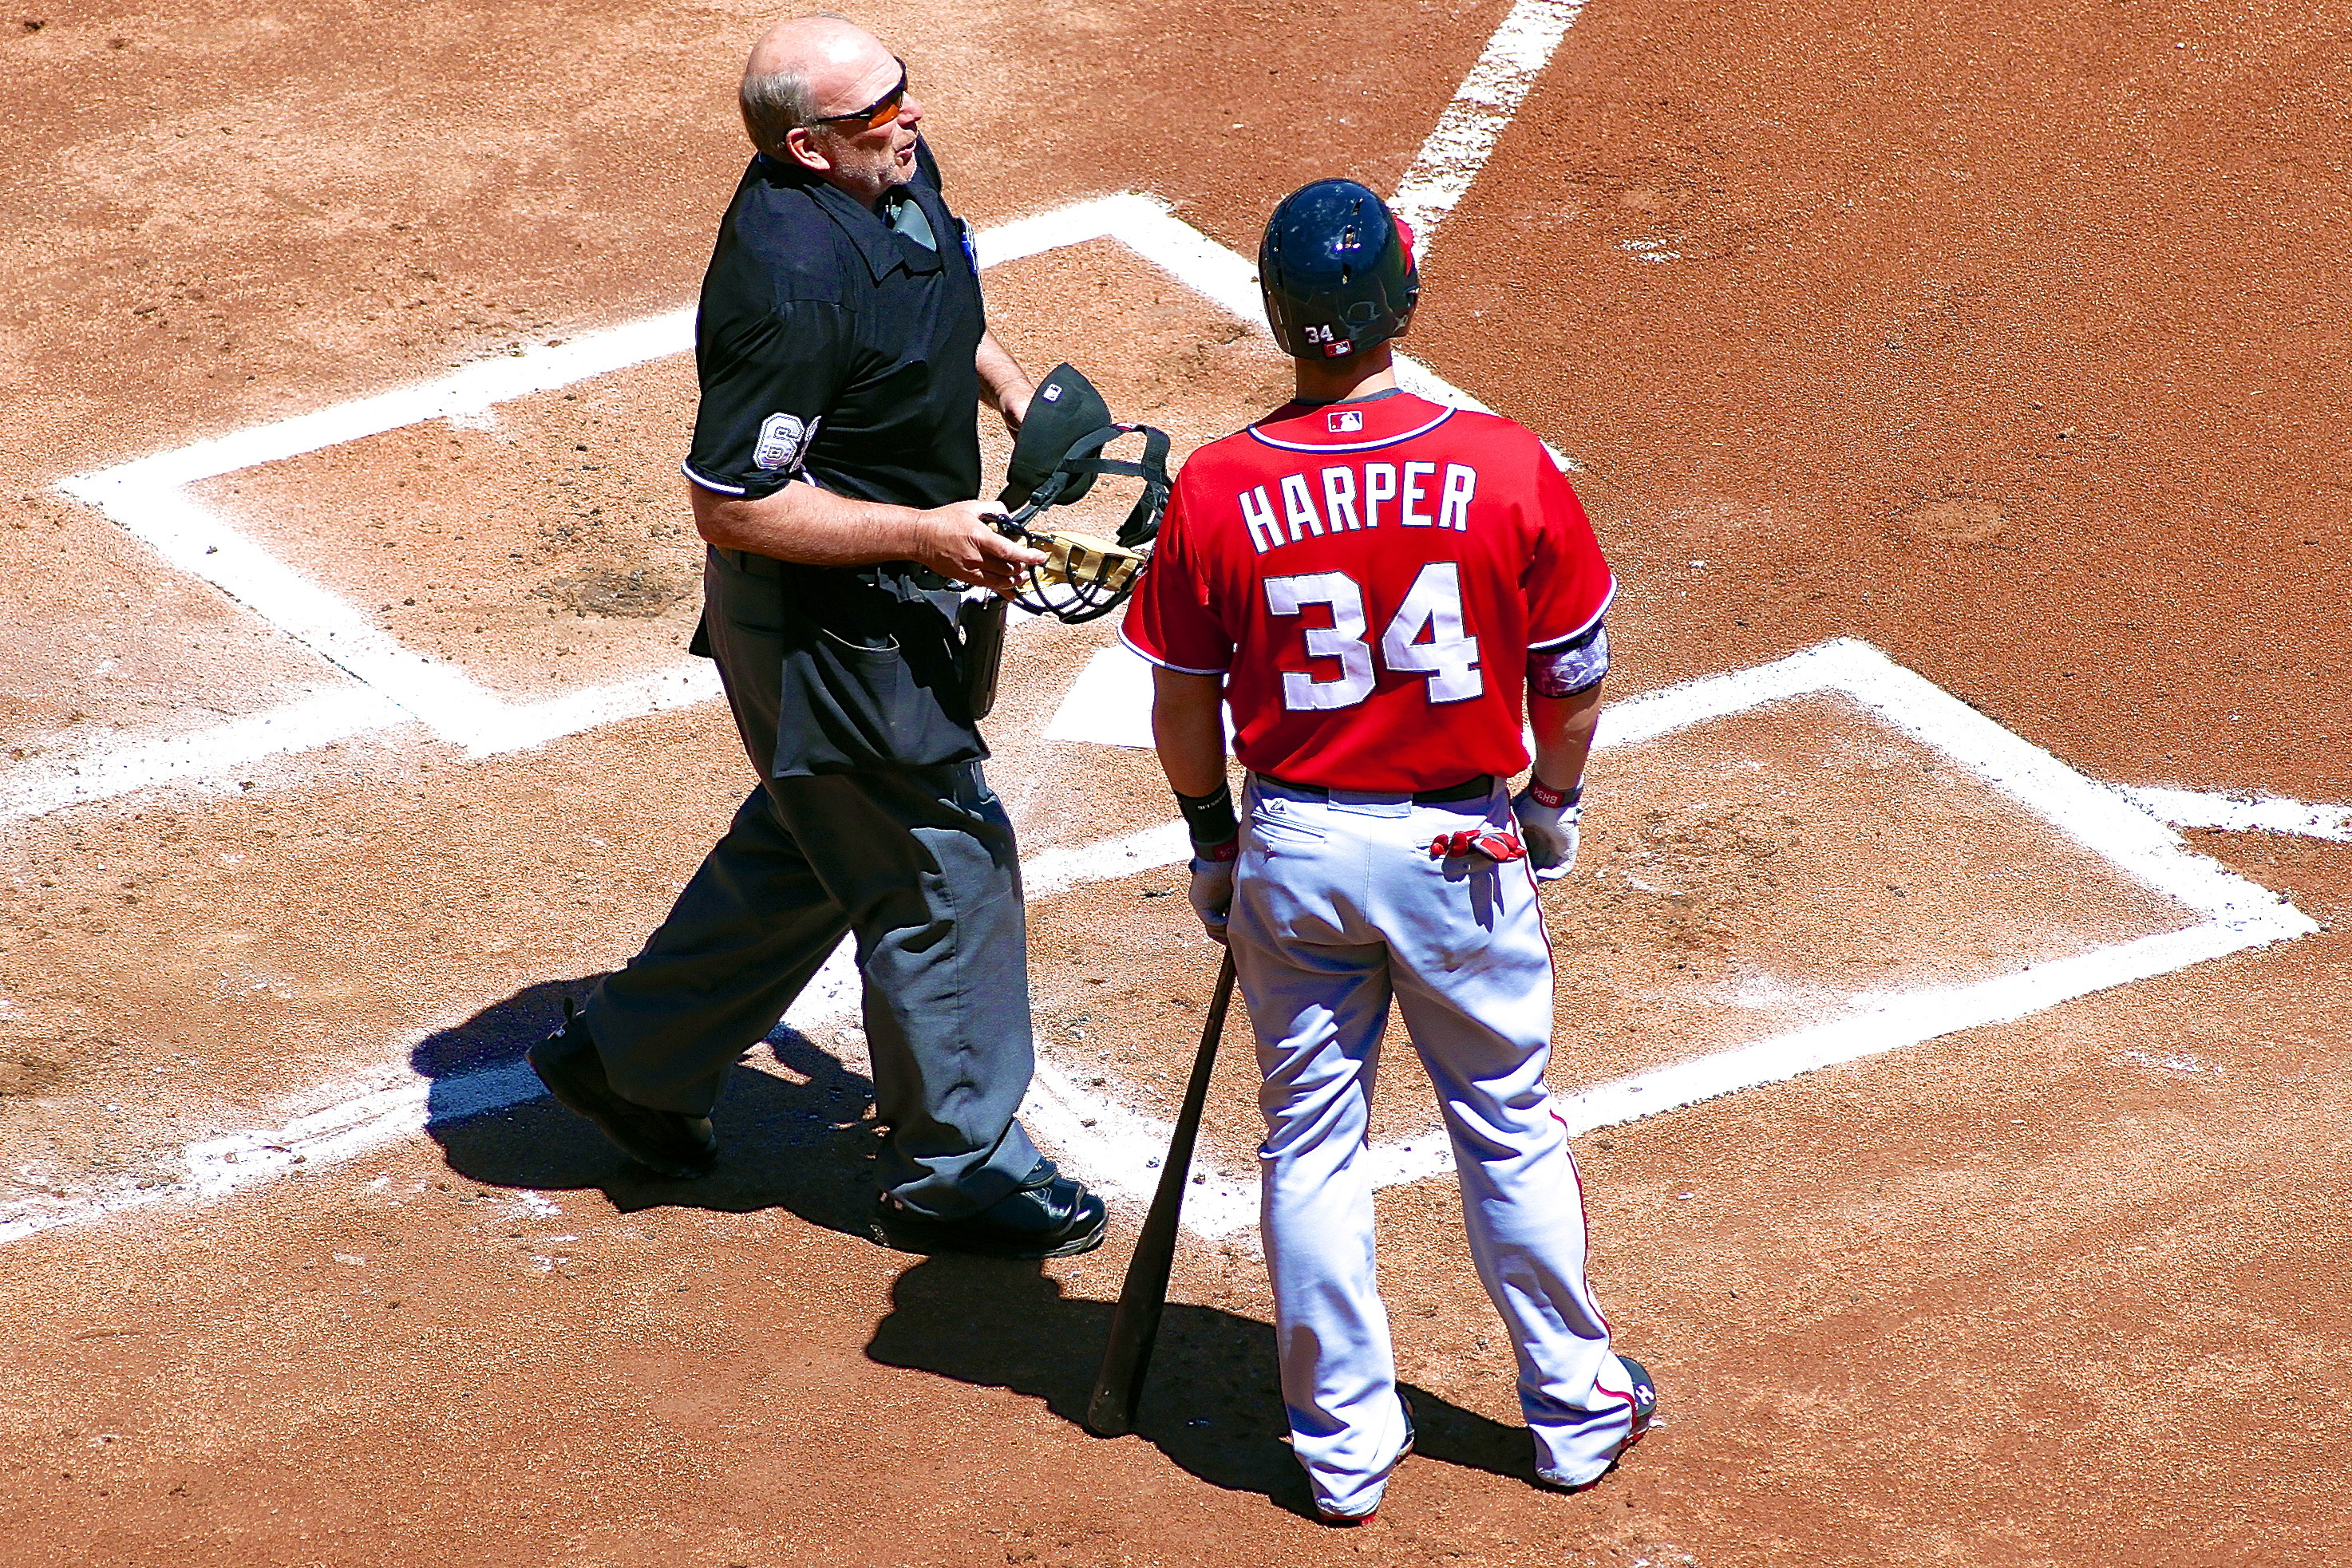 Bryce Harper was lucky to avoid an ejection after shouting at umpire